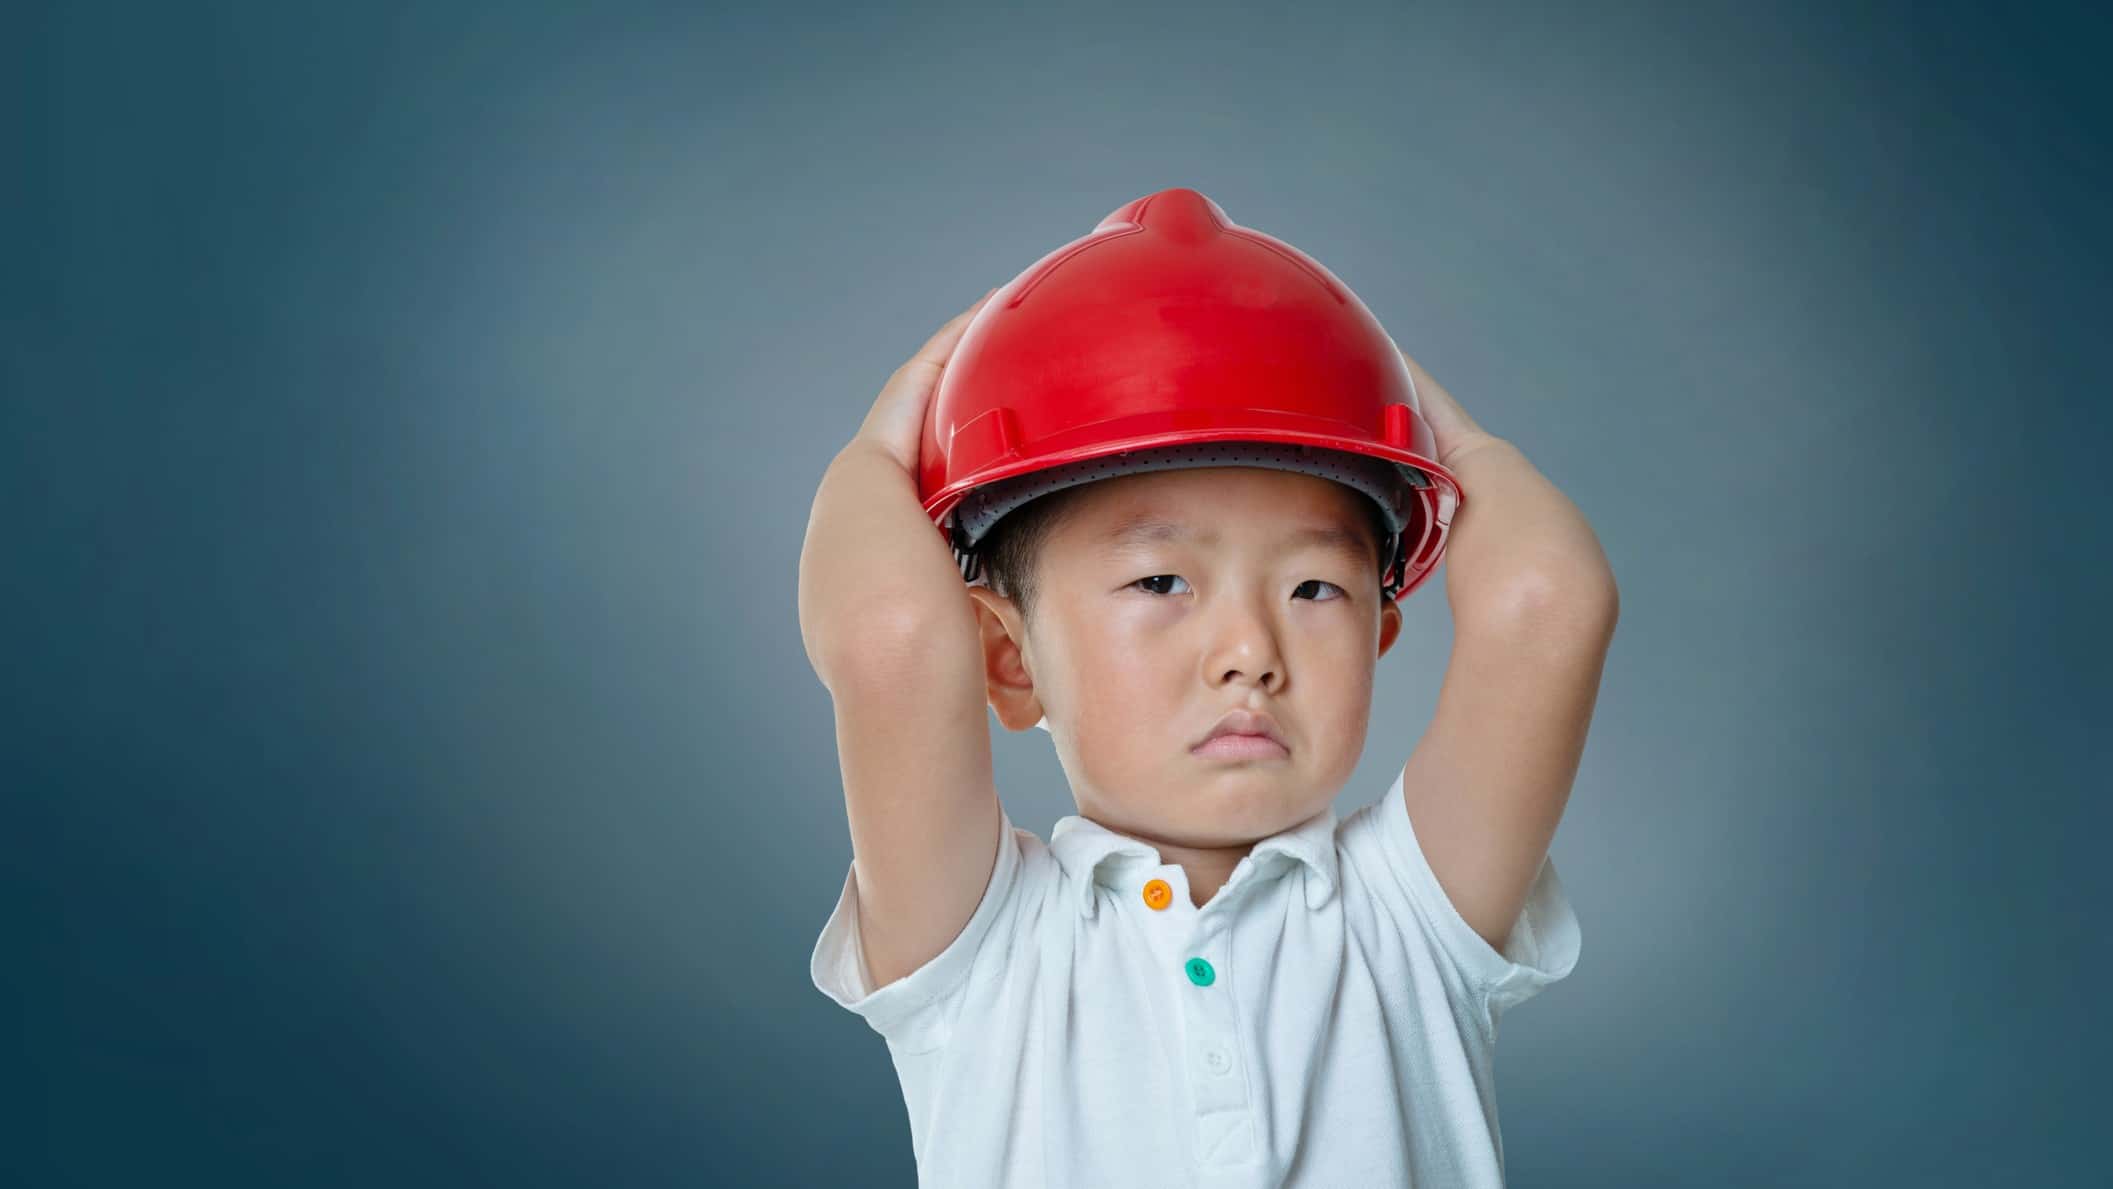 Young boy wearing a red hard hat frowning with his hands on his head.